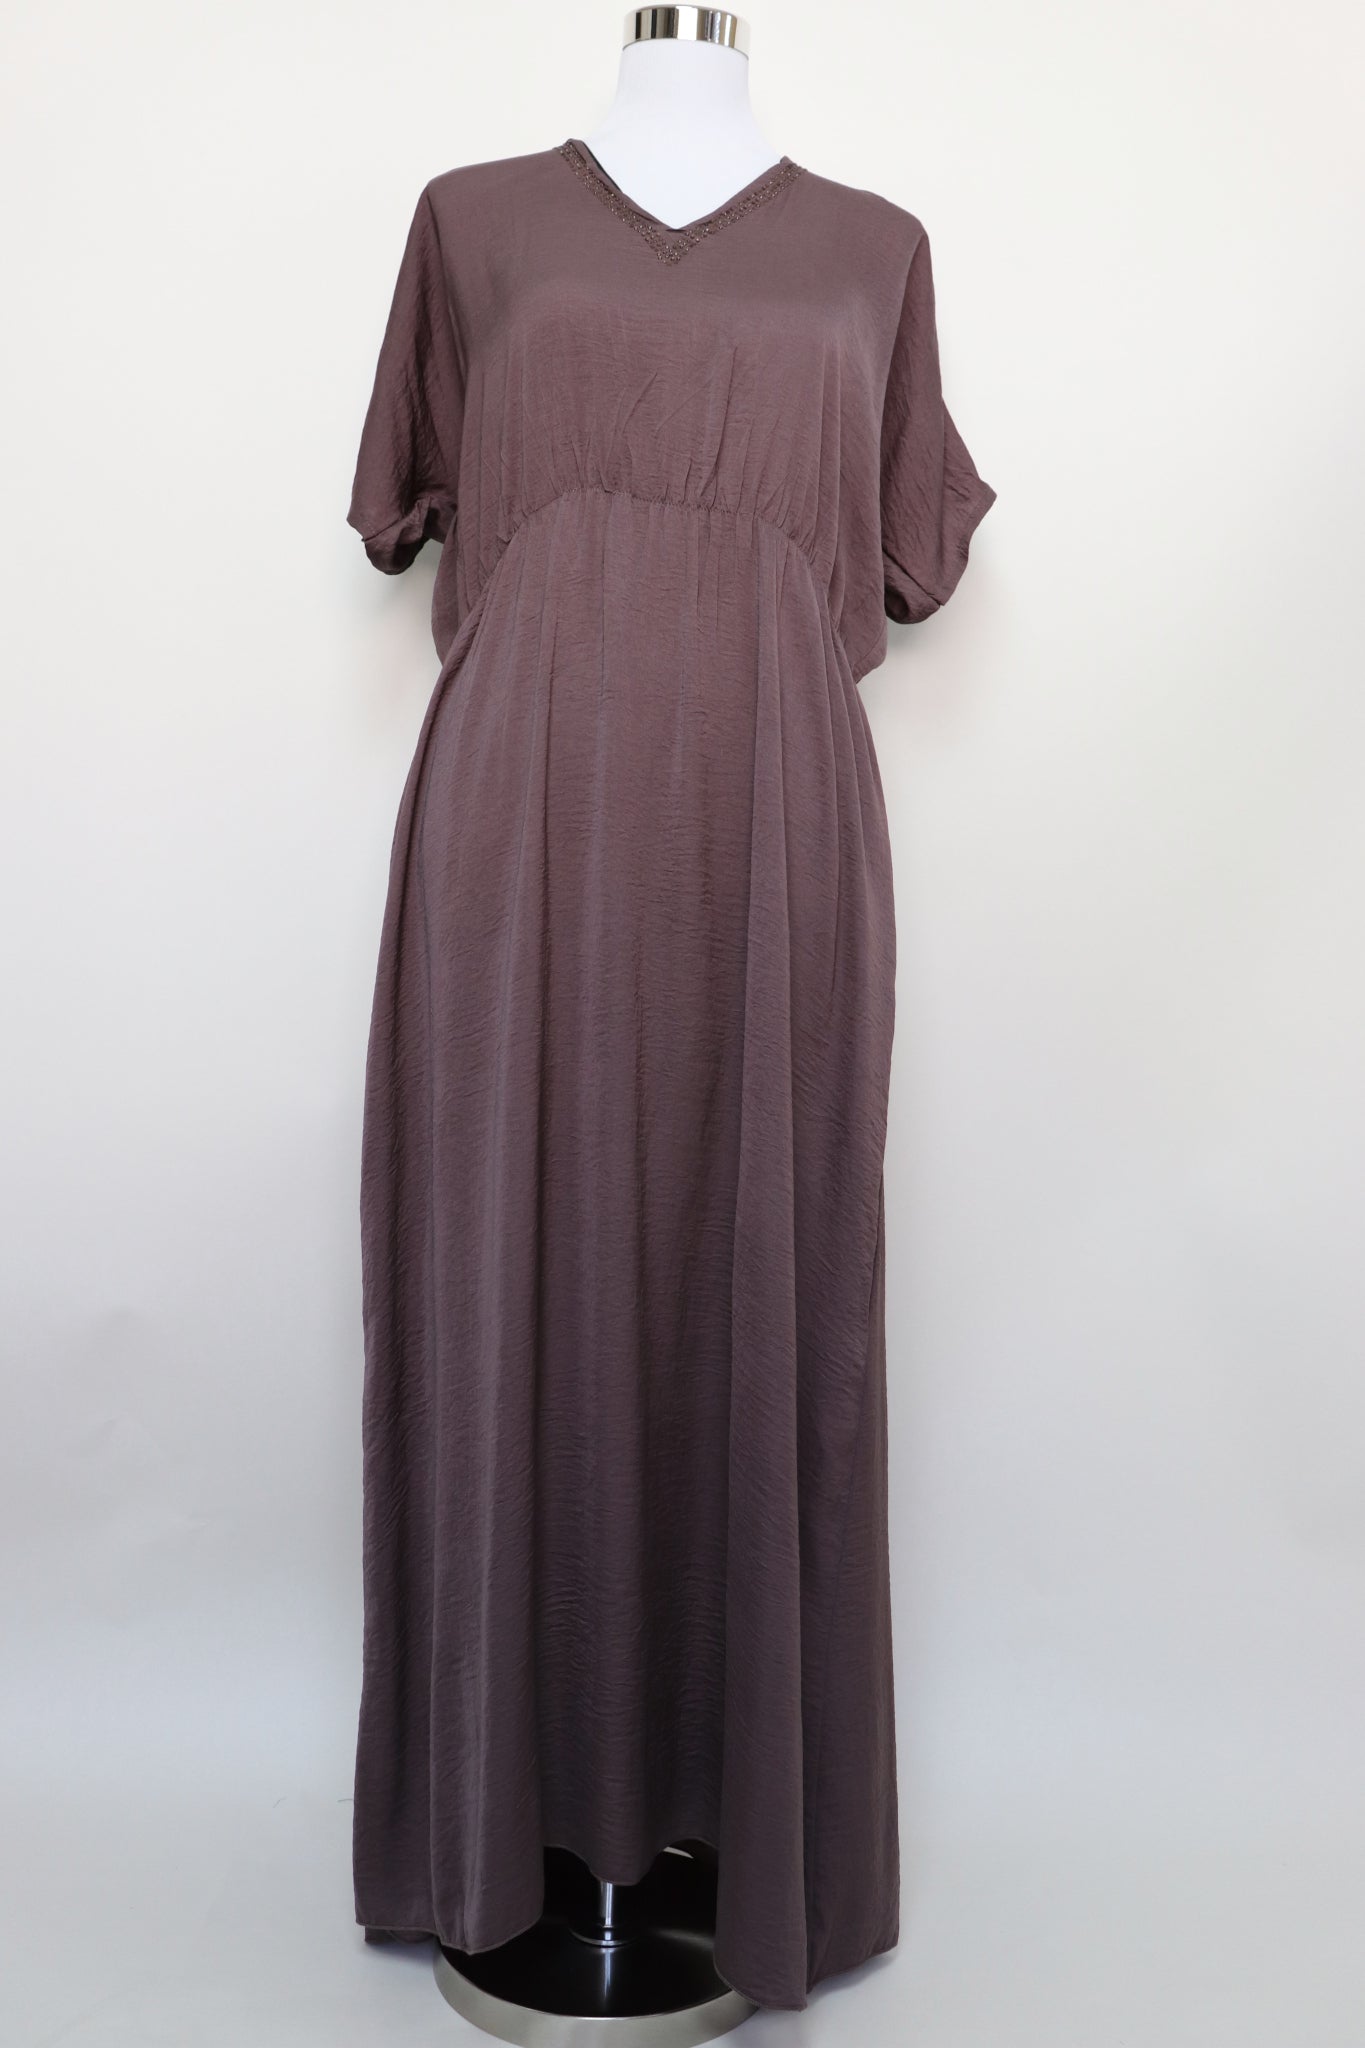 3 Piece Set Open Tiered Abaya - Cocoa